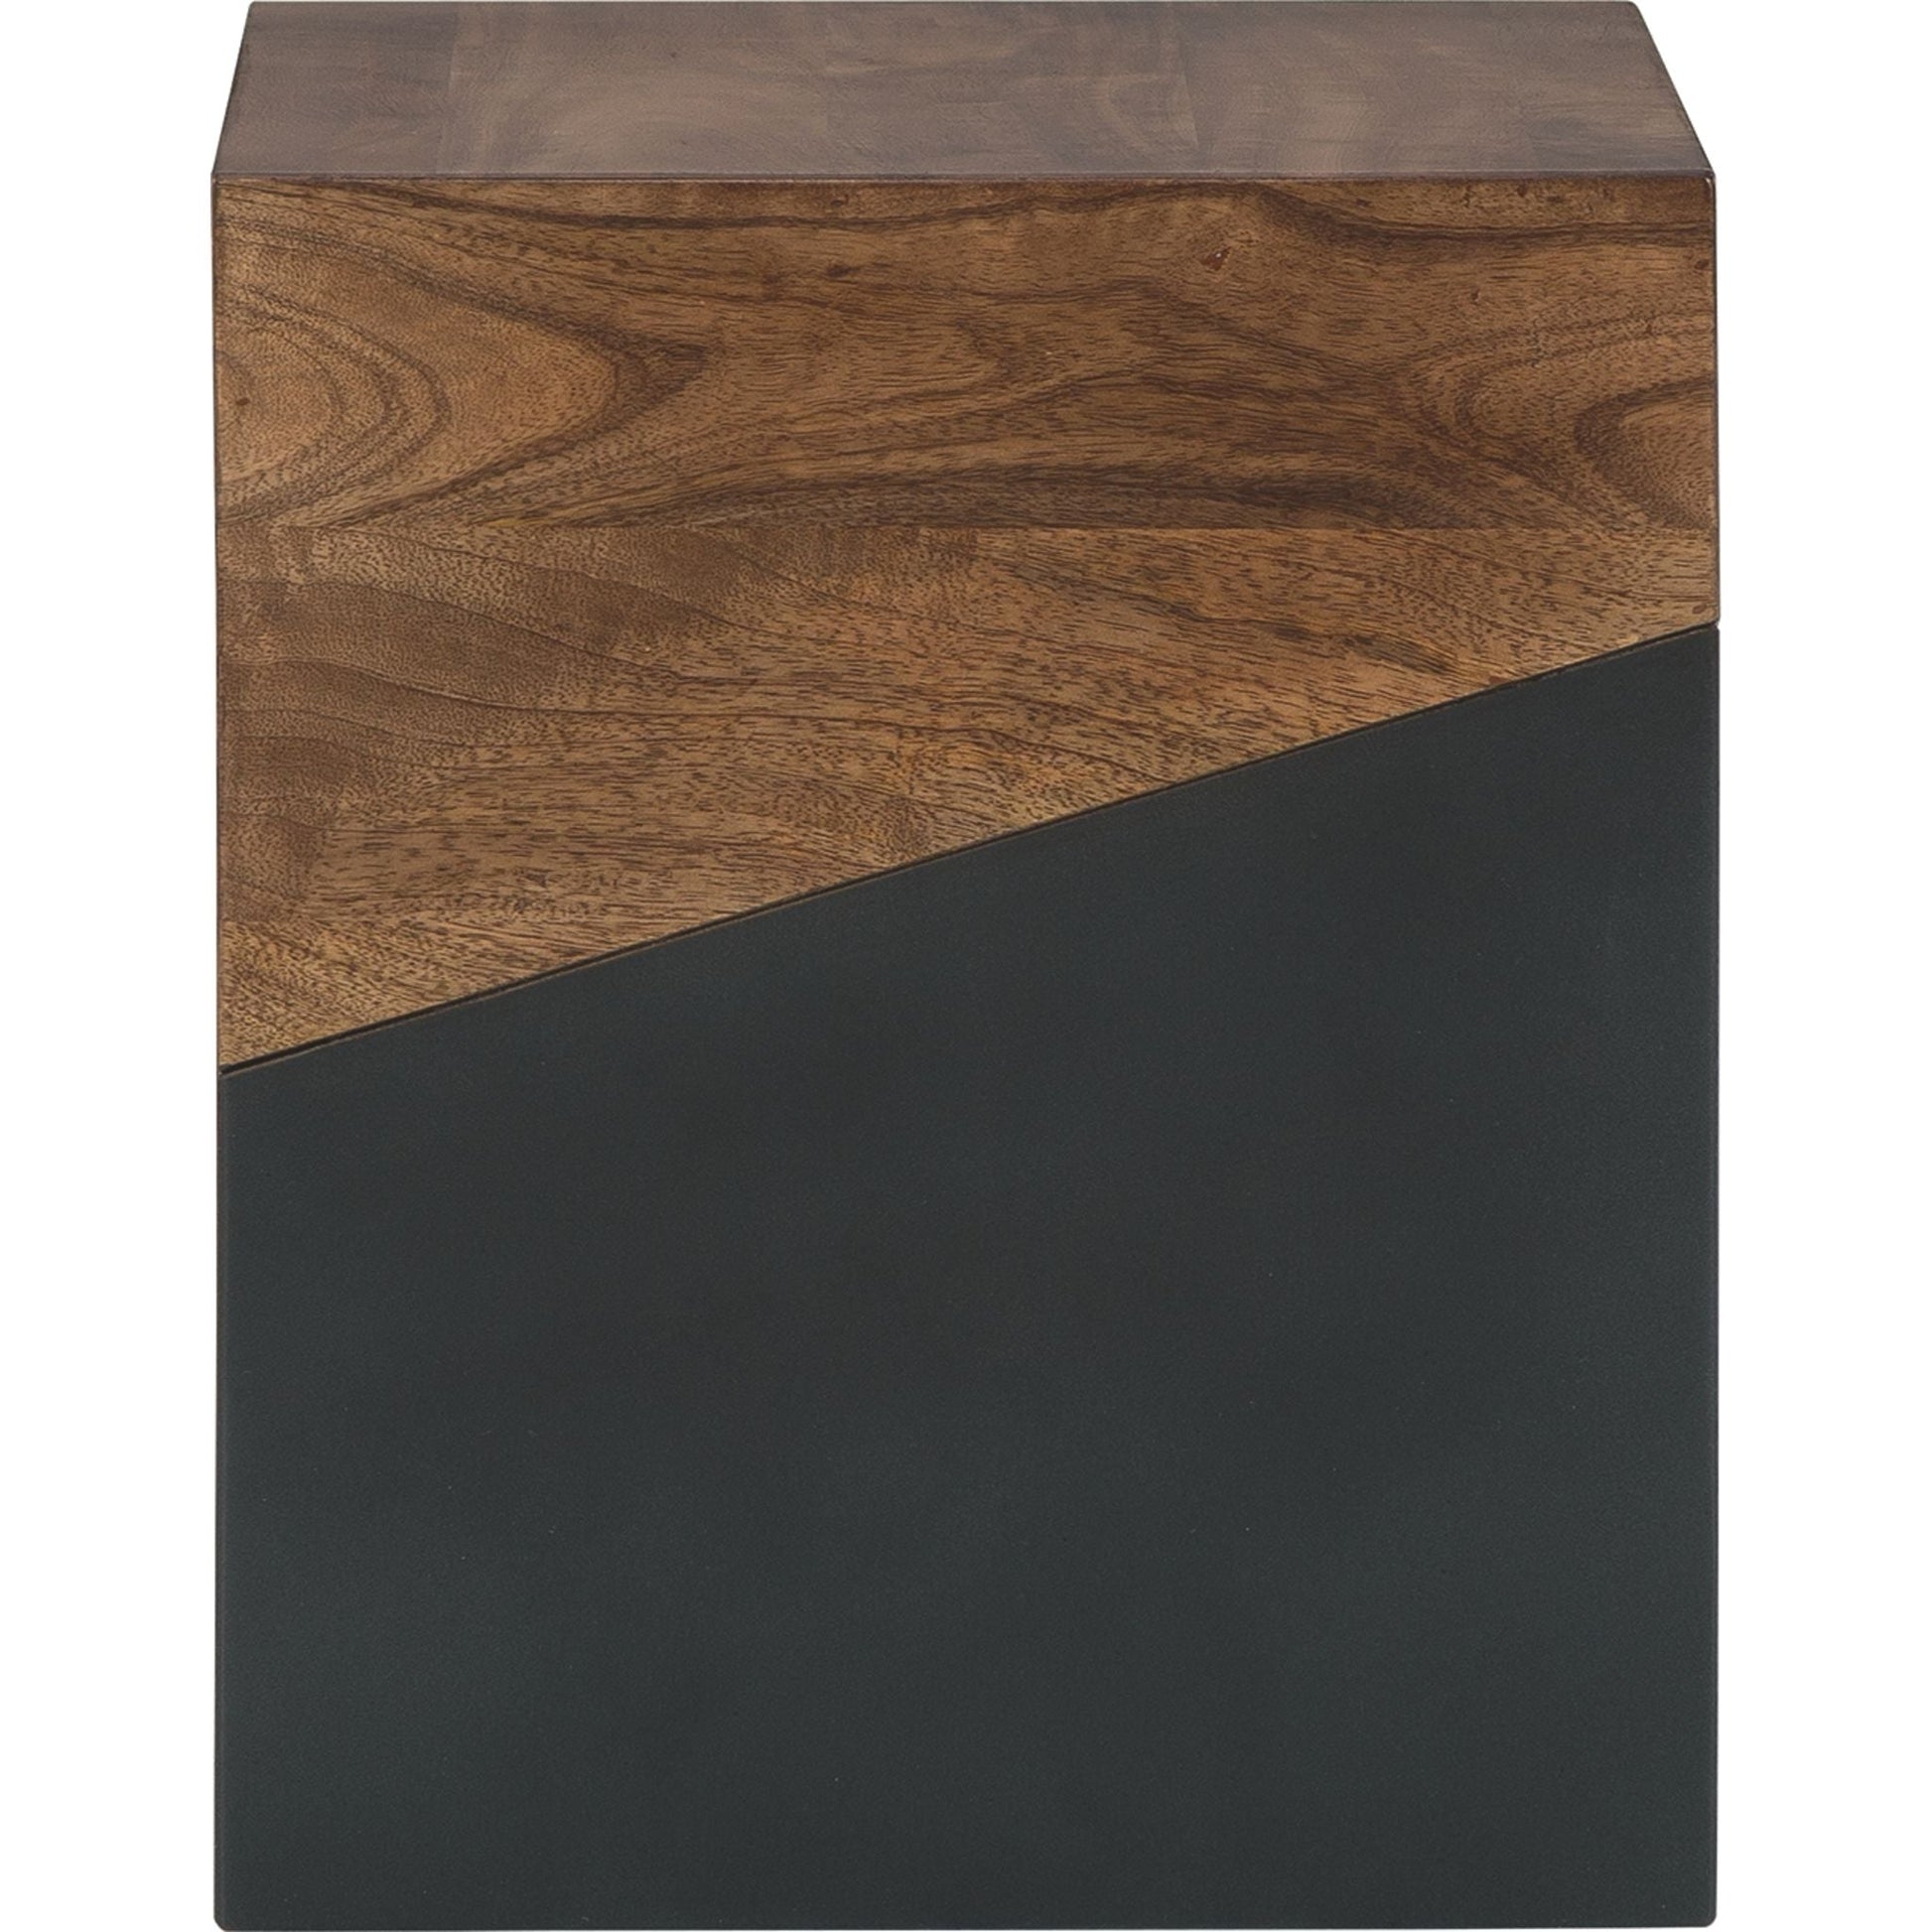 Trailbend Accent Table - Brown/Gunmetal